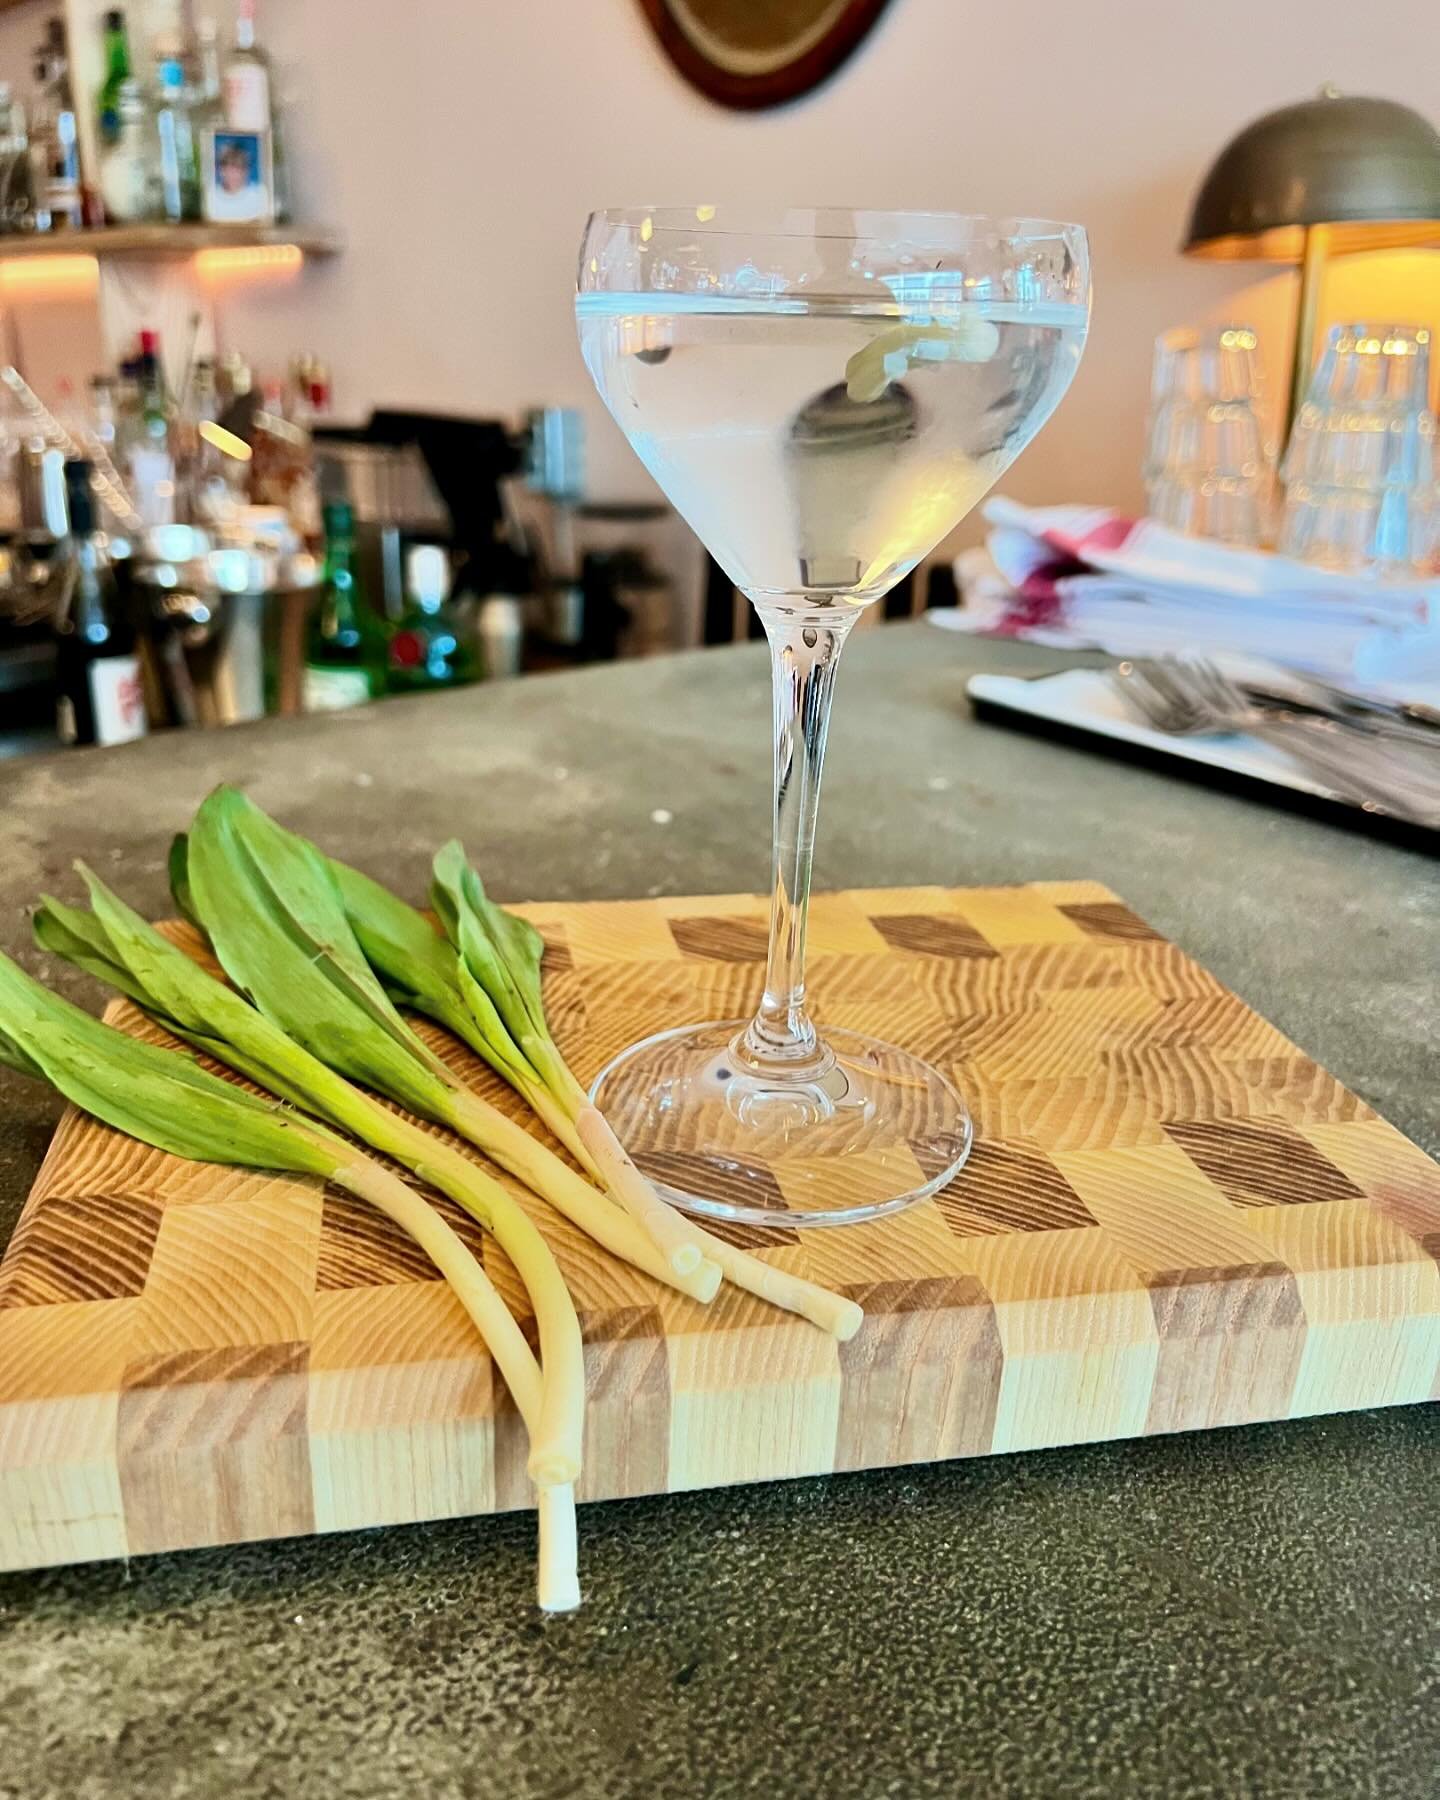 New Gibson with wild leeks, gin and a bit extra vermouth.